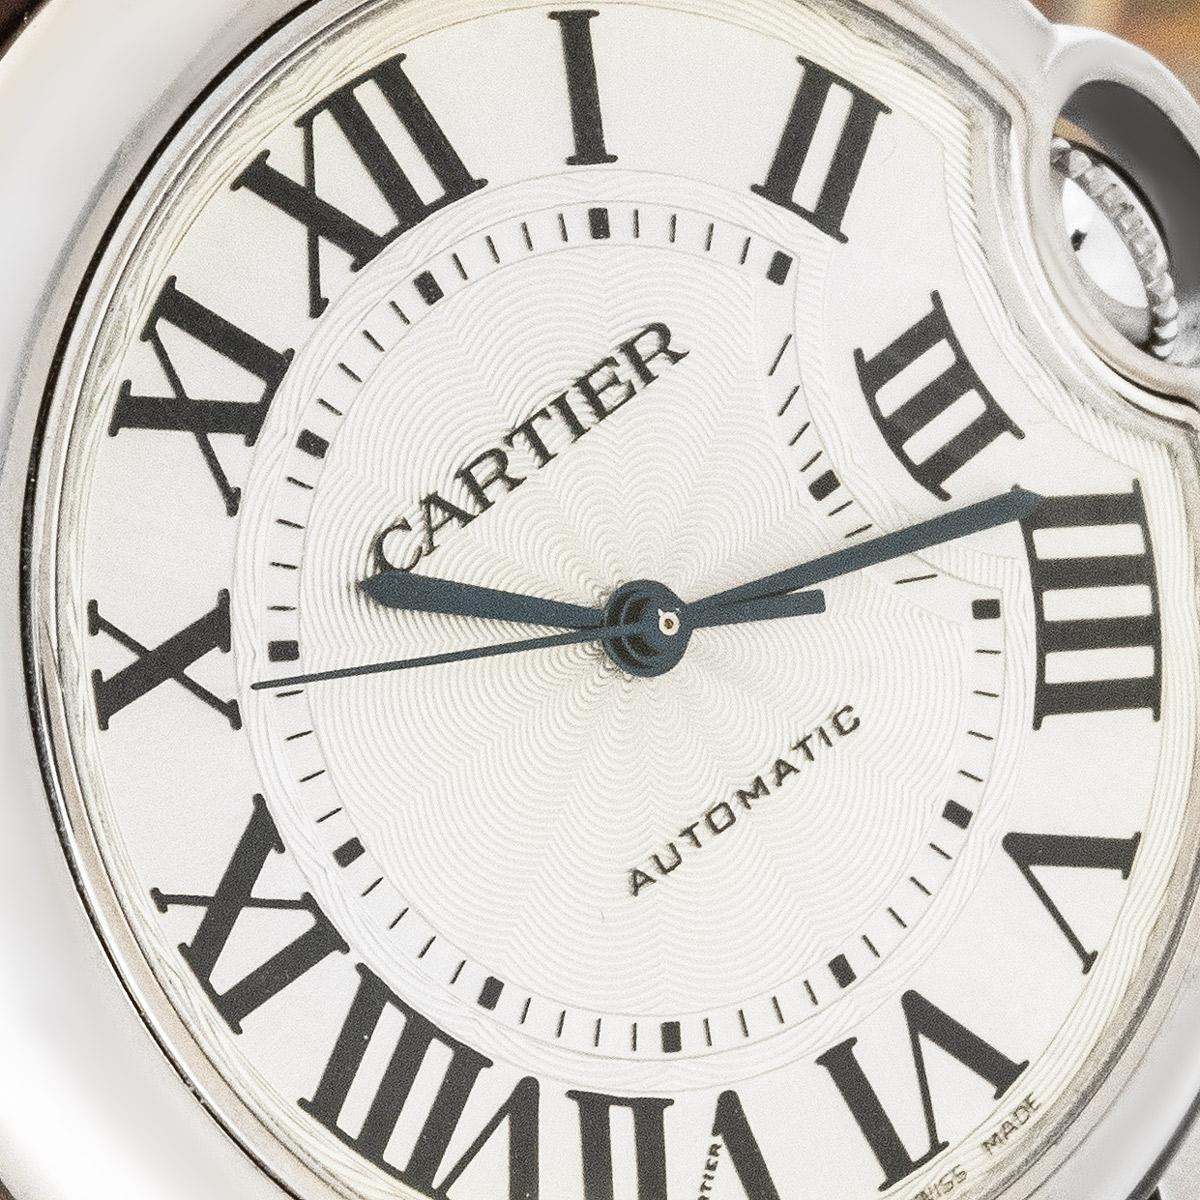 Cartier Ballon Bleu 36mm White Gold In Excellent Condition For Sale In London, GB